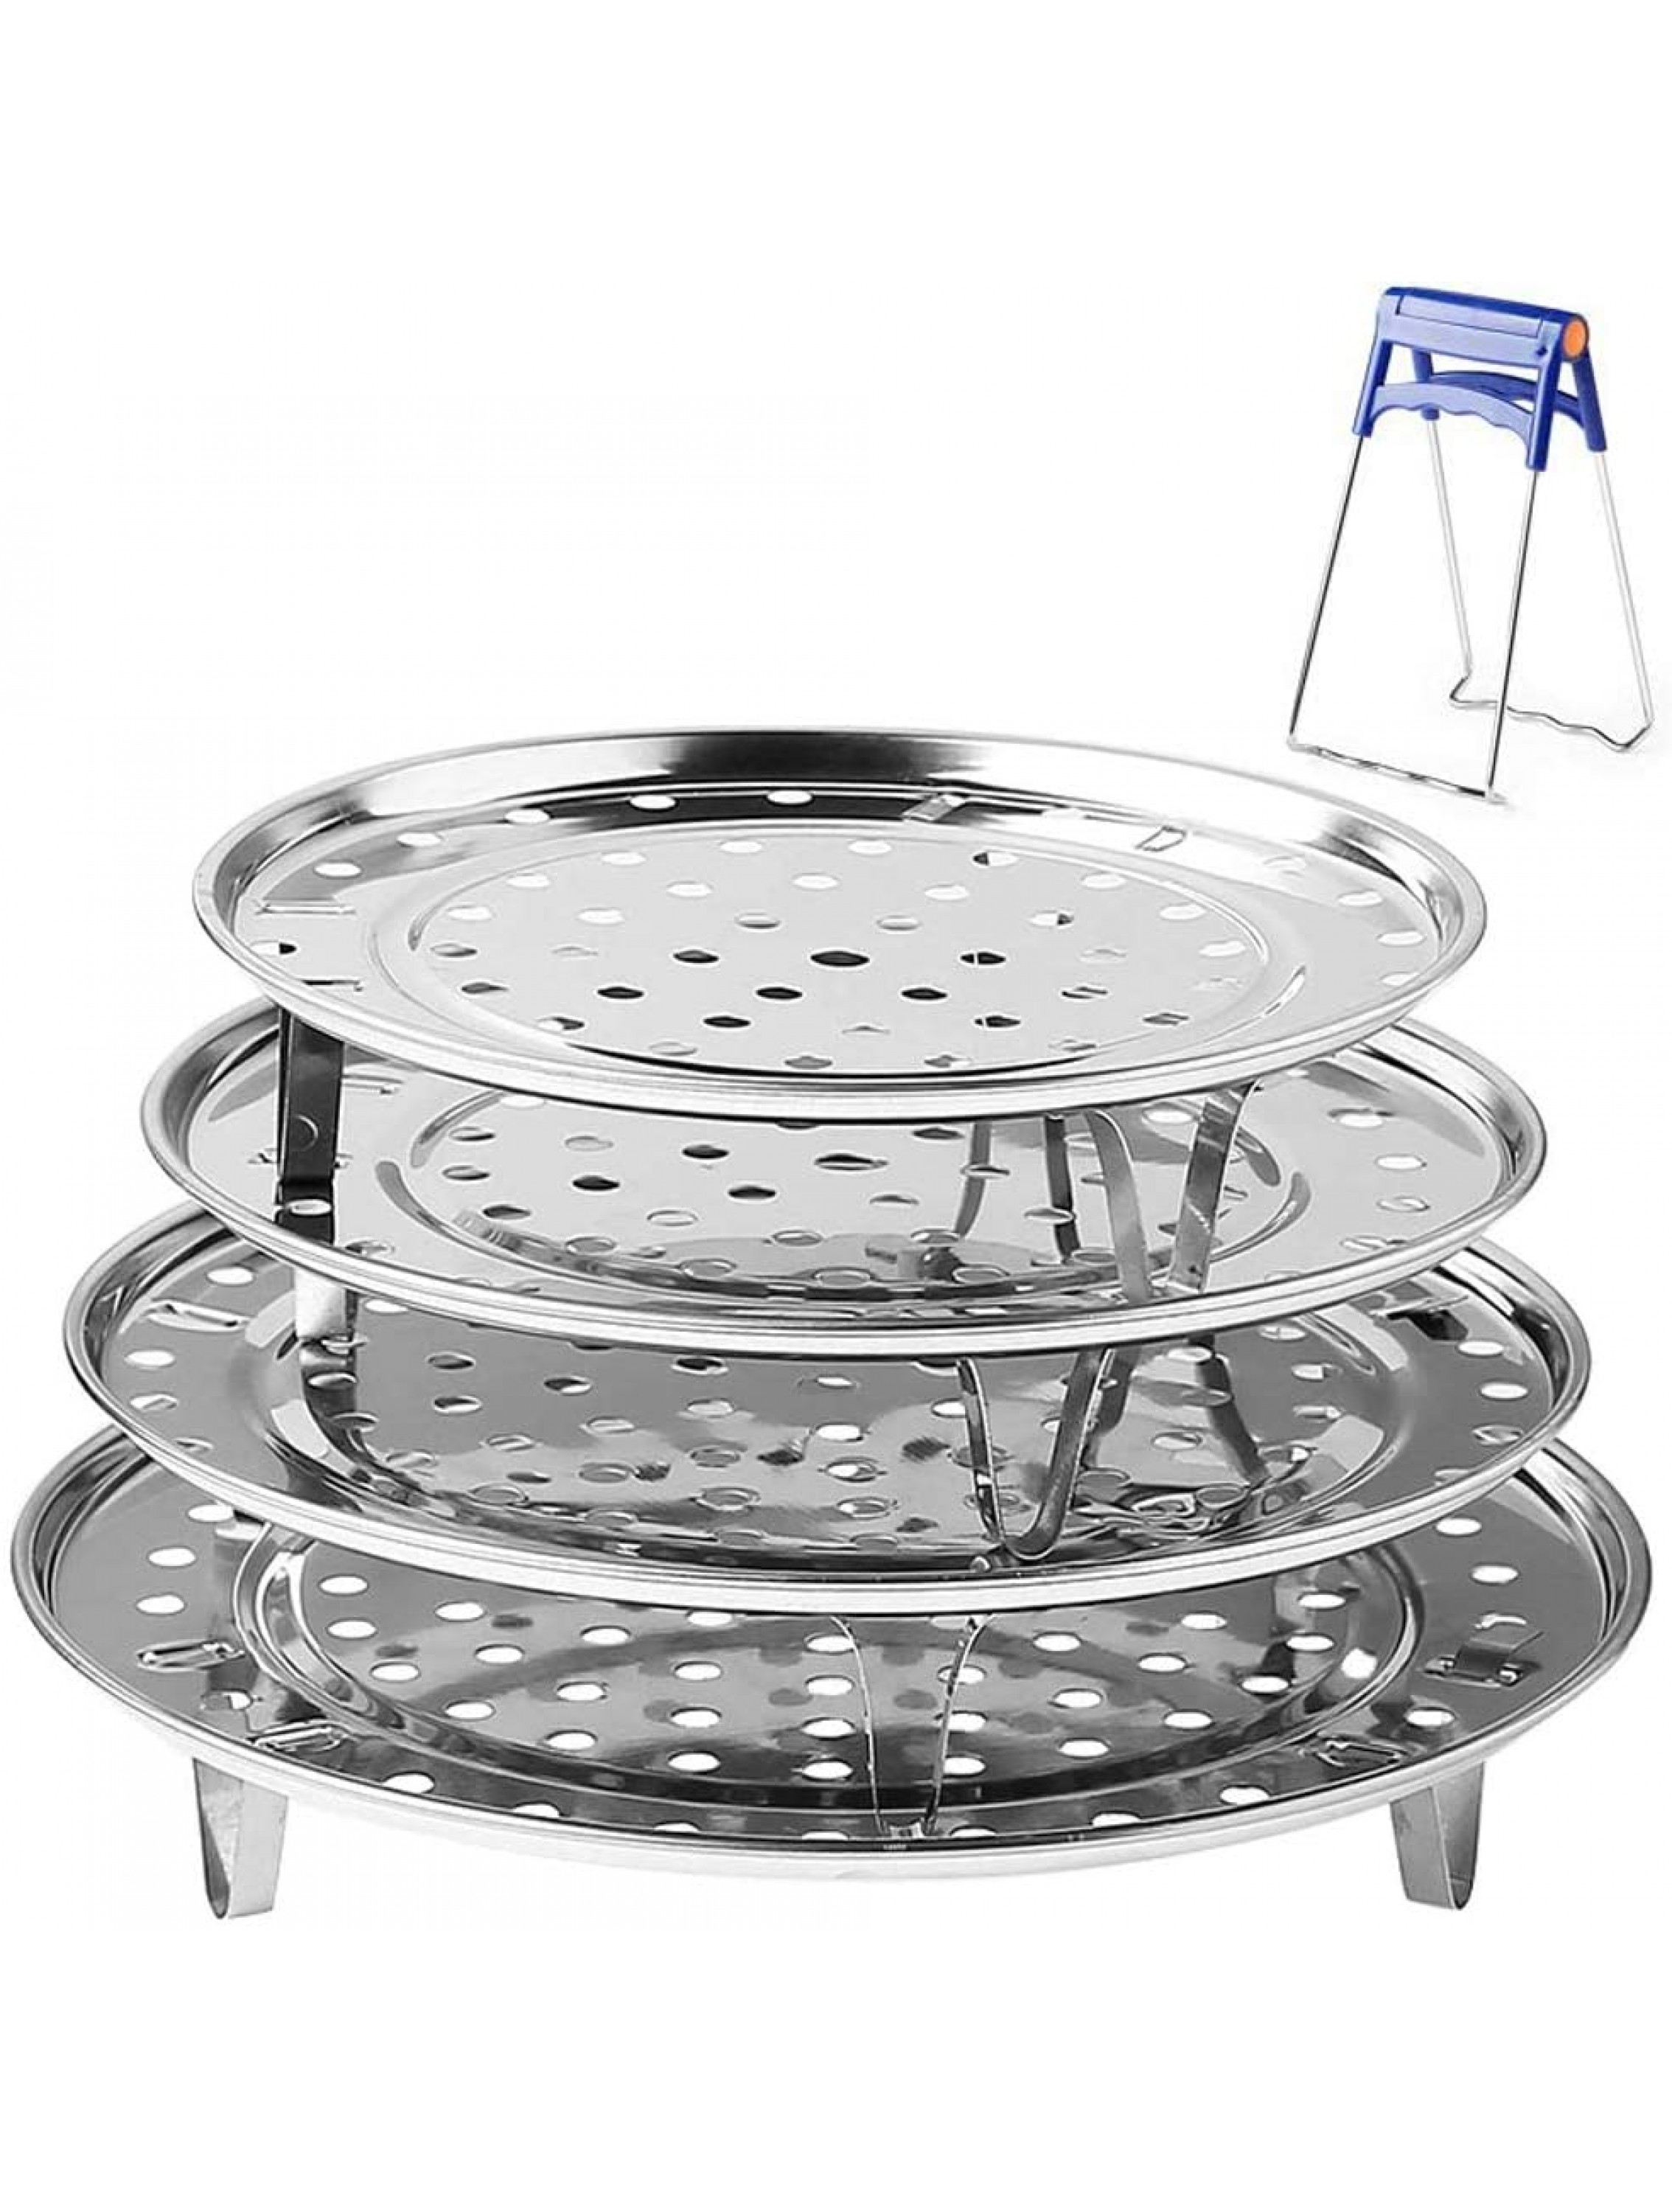 Round Stainless Steel Steamer Rack 7.6 8.5 9.33 10.23 Inch Diameter Steaming Rack Stand Canner Canning Racks Stock Pot Steaming Tray Pressure Cooker Cooking Toast Bread Salad Baking 4 Pack - B9L2N7SZ3